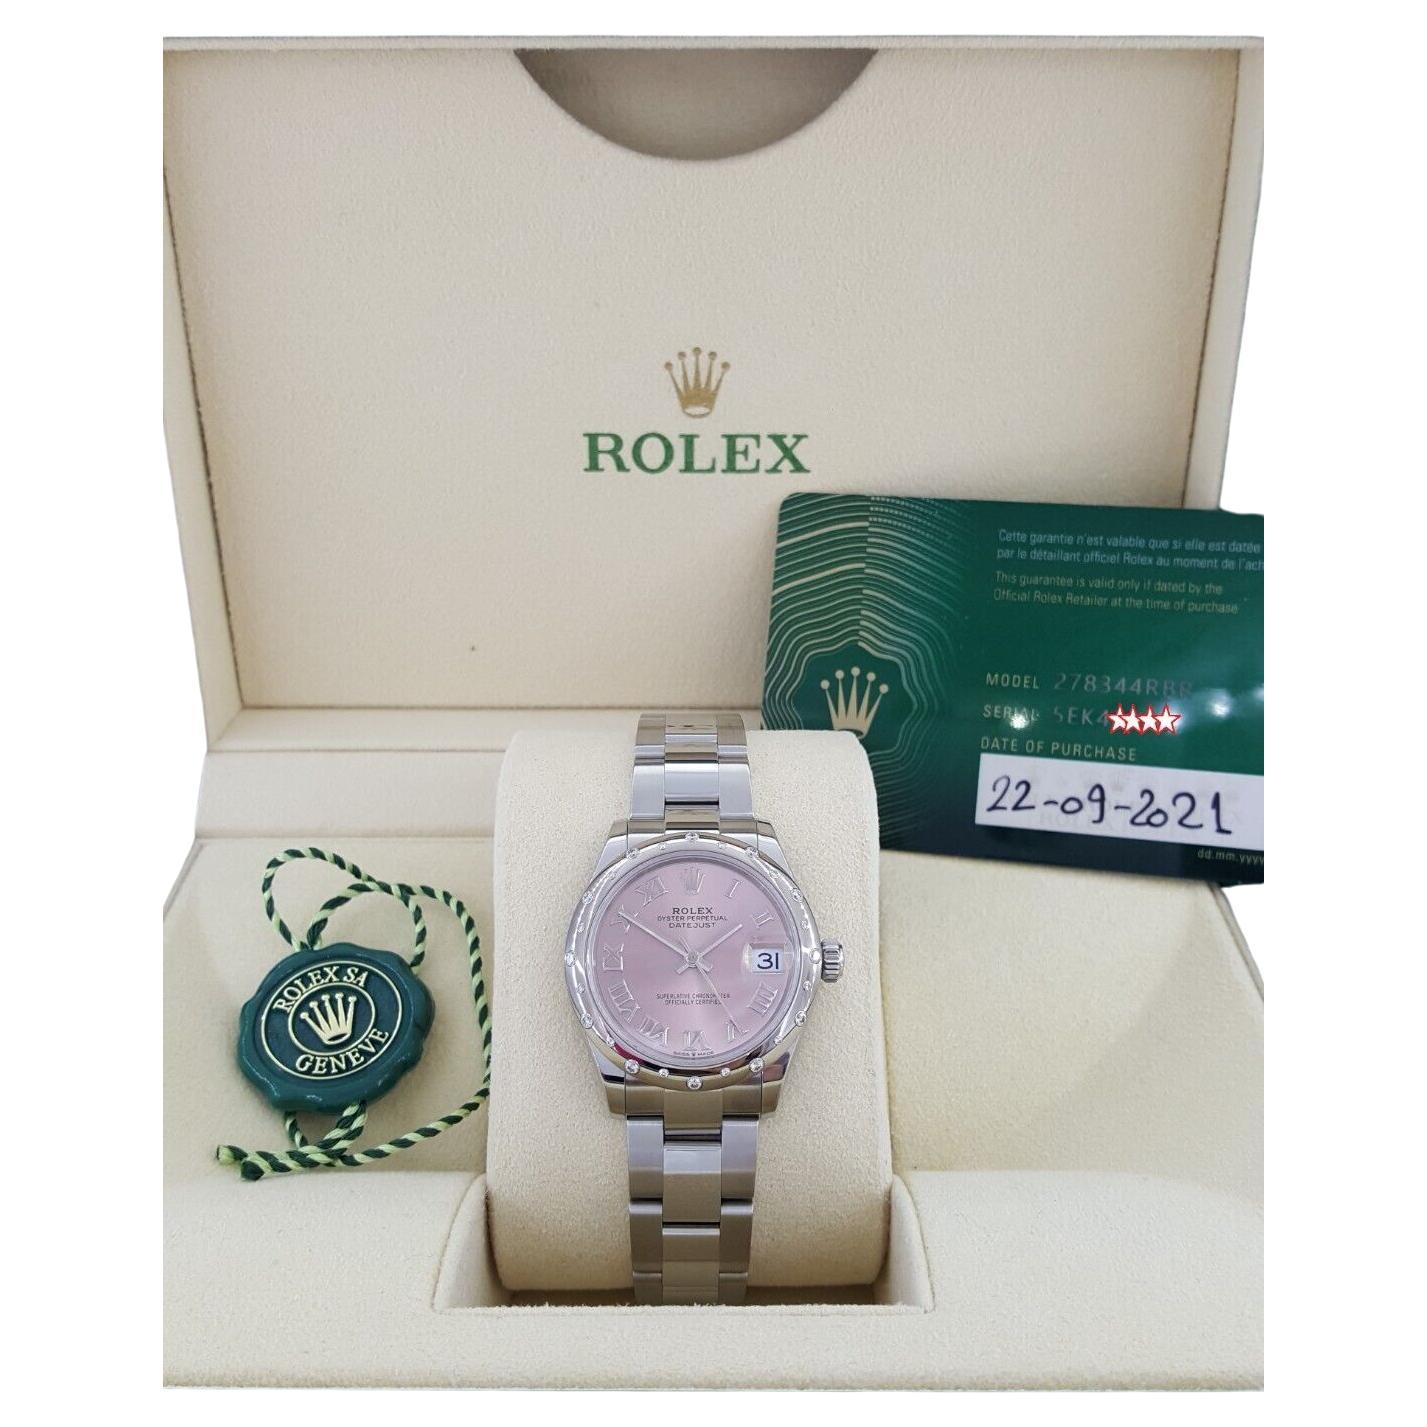 The Rolex Lady DateJust 278344 Stainless 31 mm Factory Diamond Bezel features a screw-down crown, 18K White gold Rolex Smooth bezel with Factory Diamonds, sapphire cyclops crystal, Oyster Bracelet, date calendar at 3 o'clock aperture, and can fit up